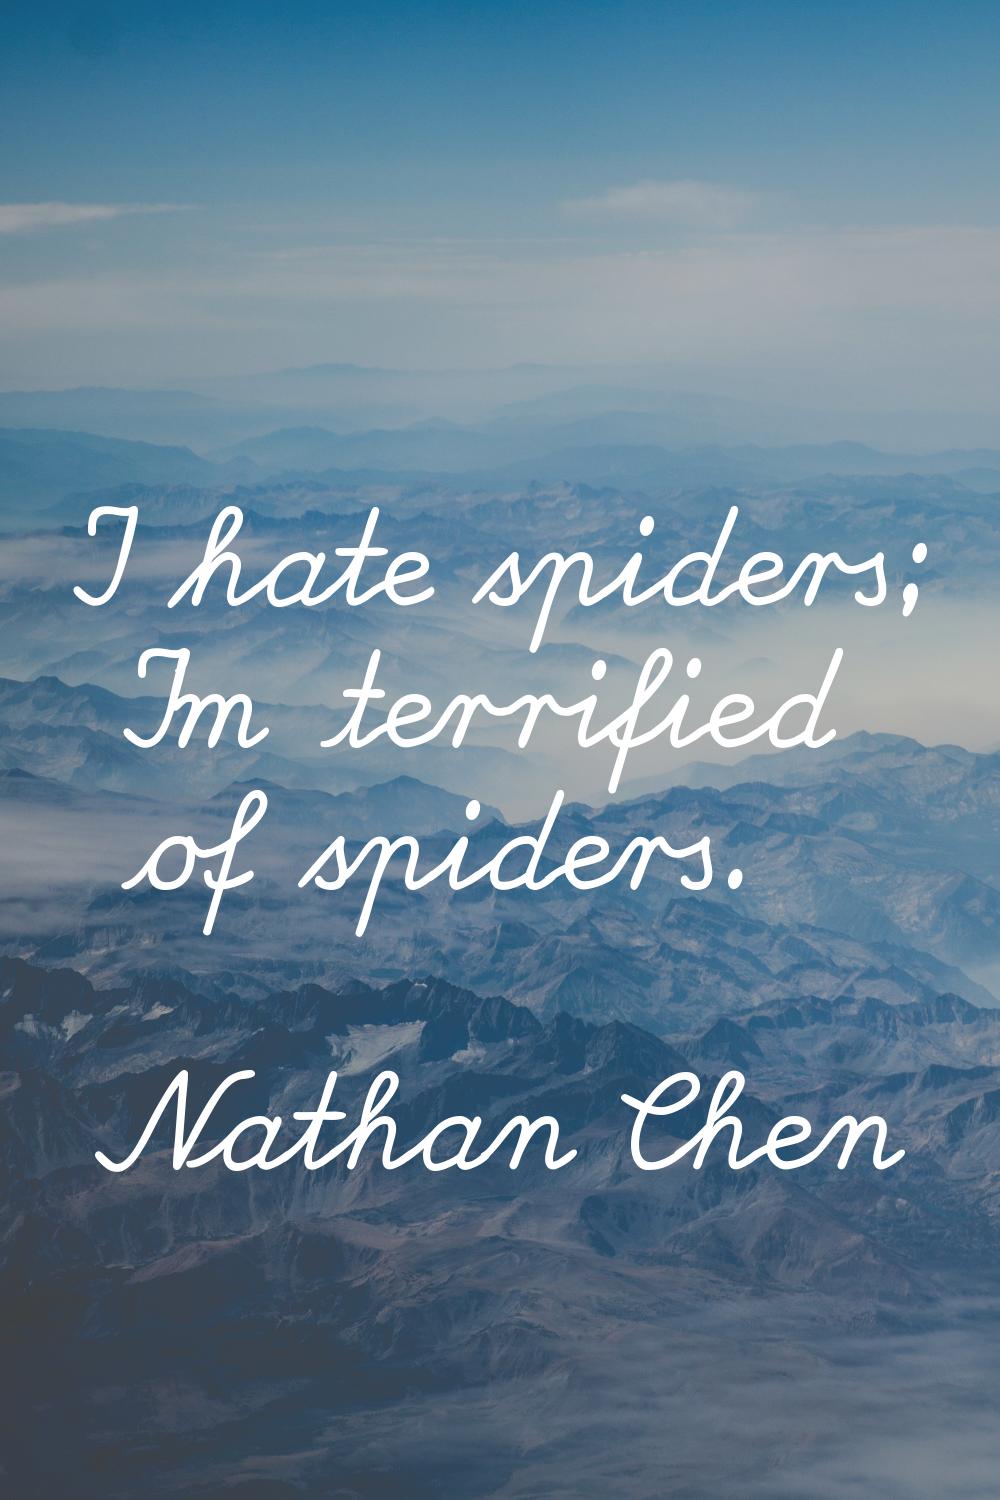 I hate spiders; I'm terrified of spiders.